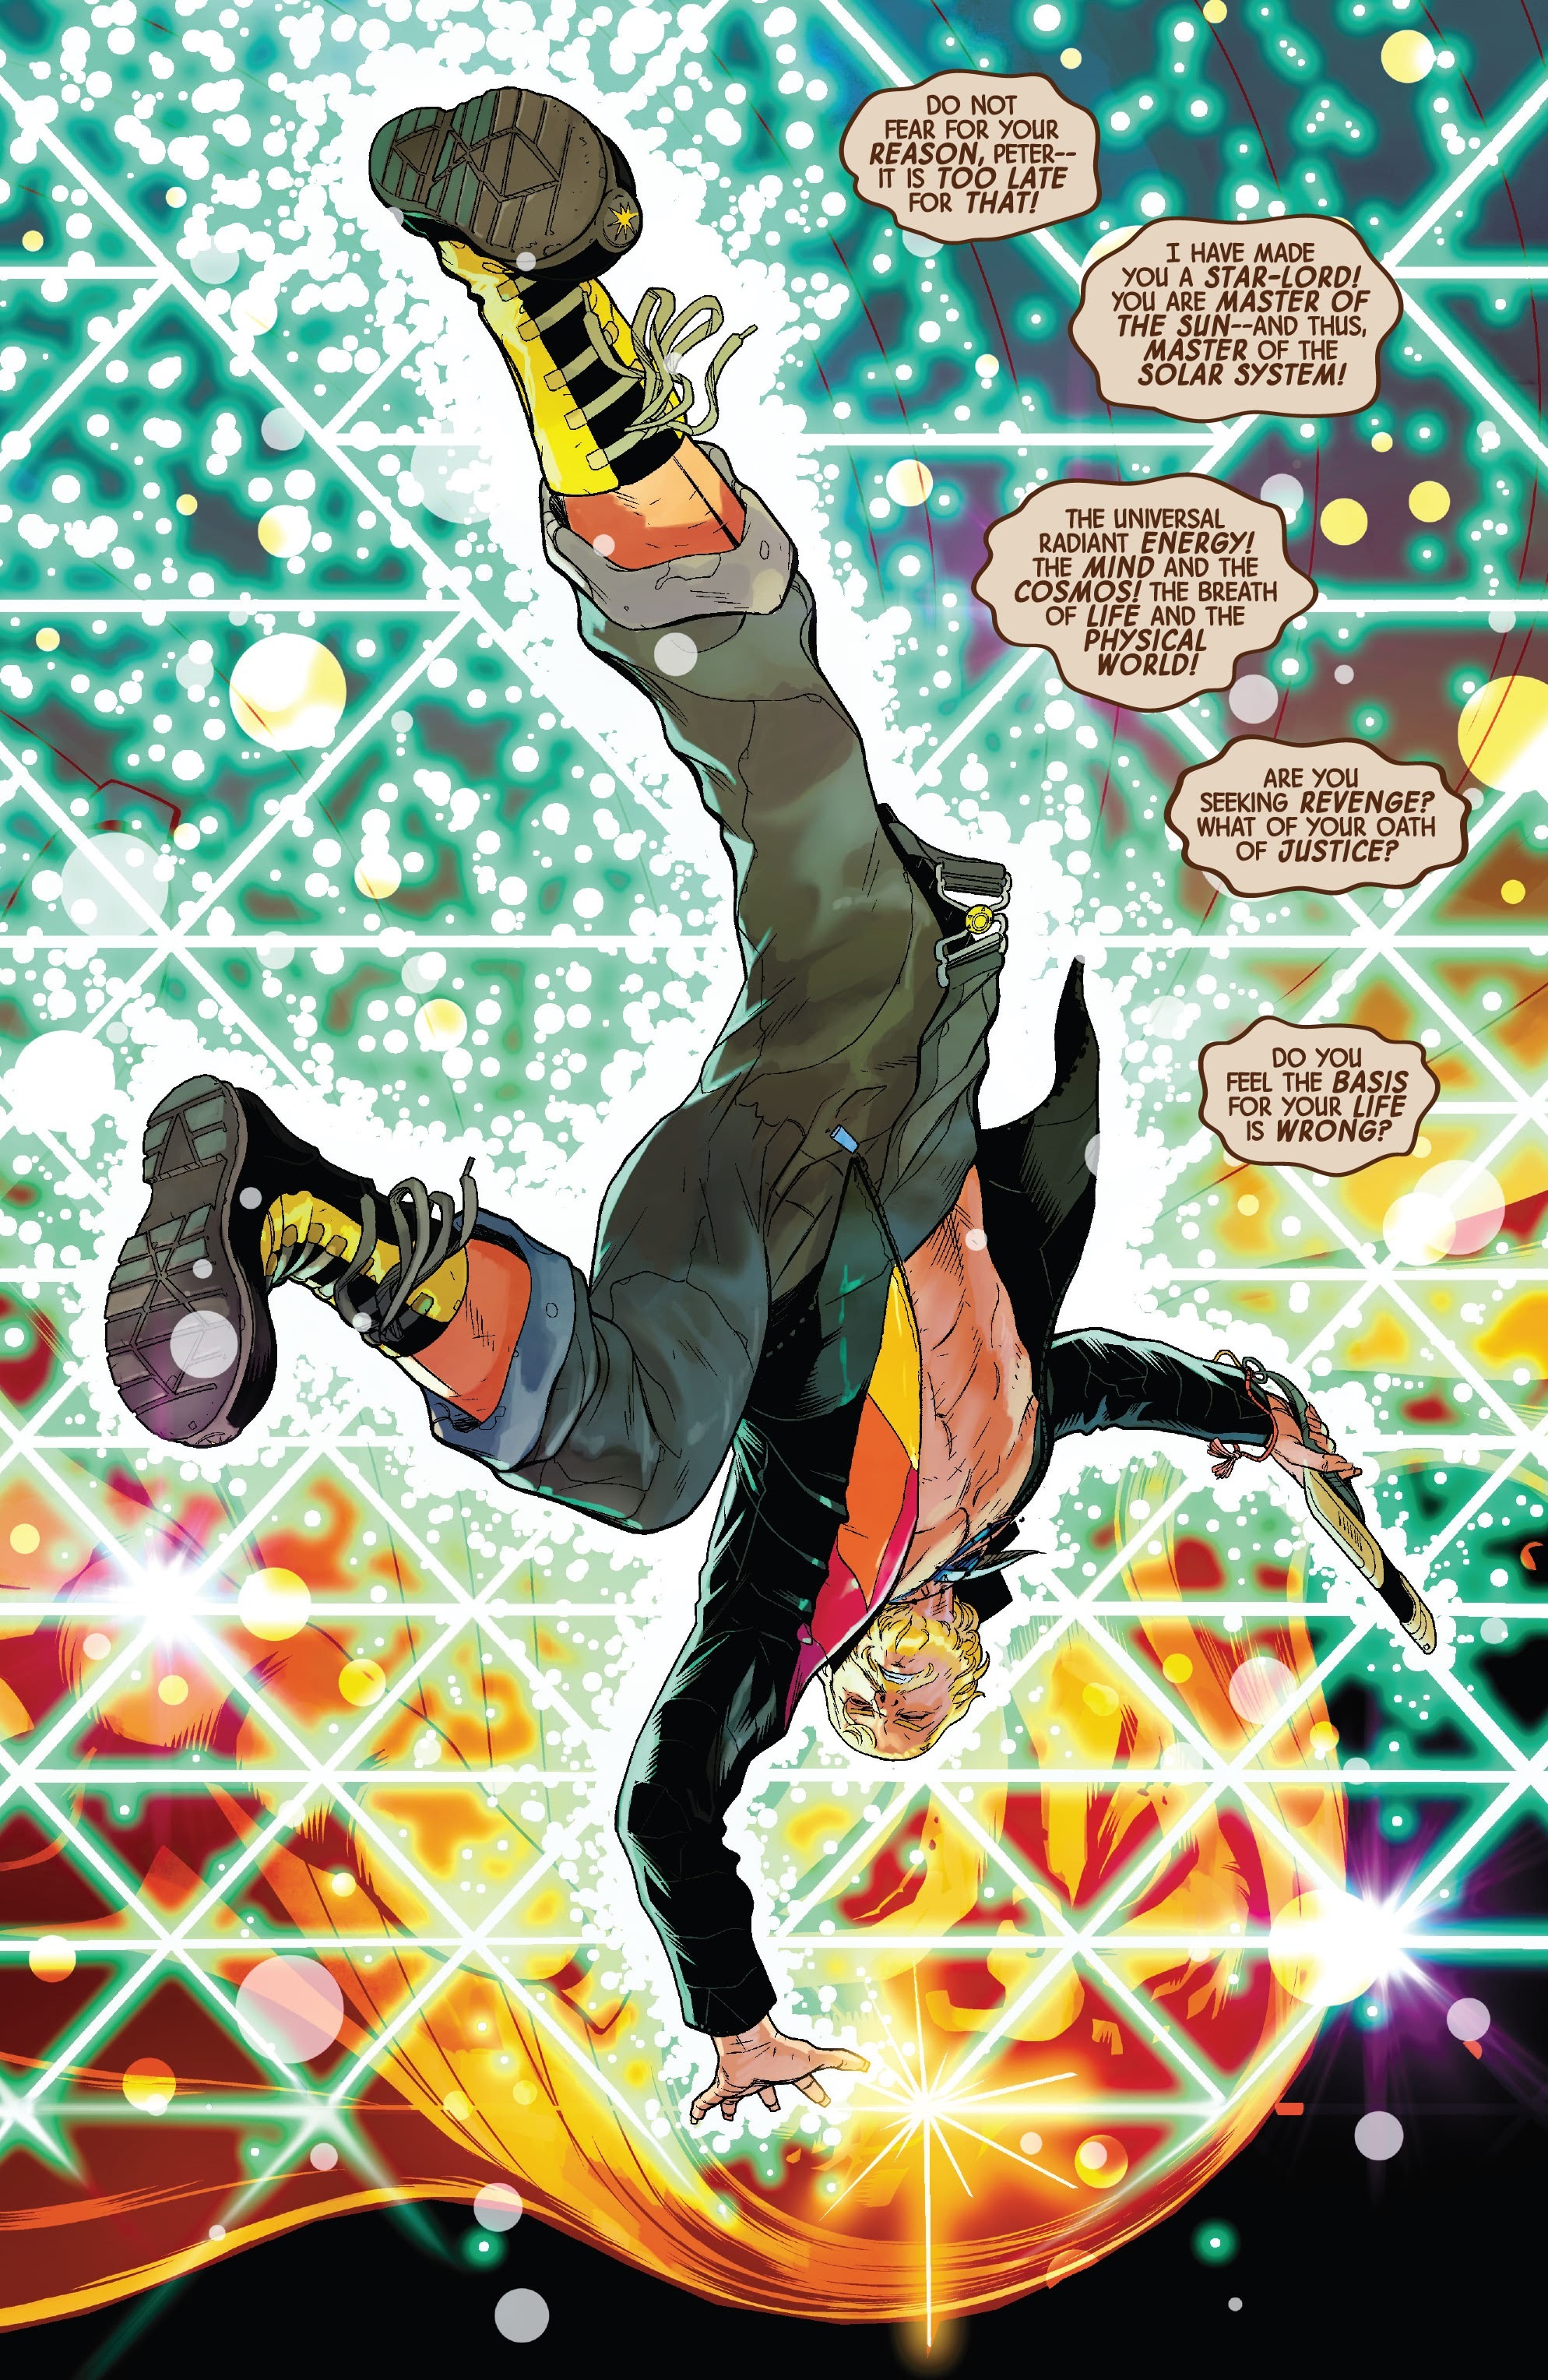 How Strong is Star-Lord (Peter Jason Quill) - Marvel COMICS